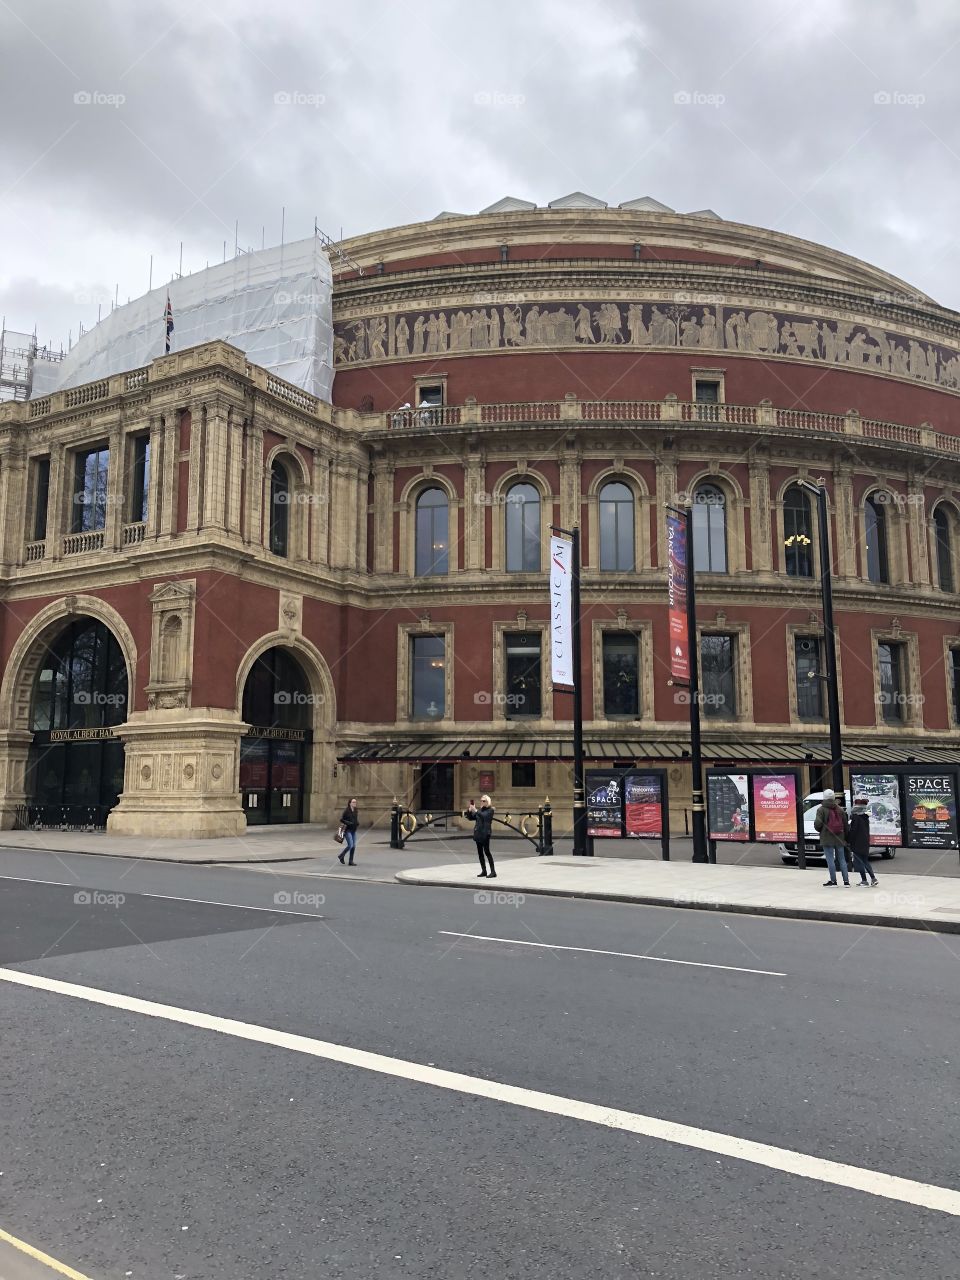 The majestic Royal Albert Hall in London, undergoing some minor renovations at the time. 